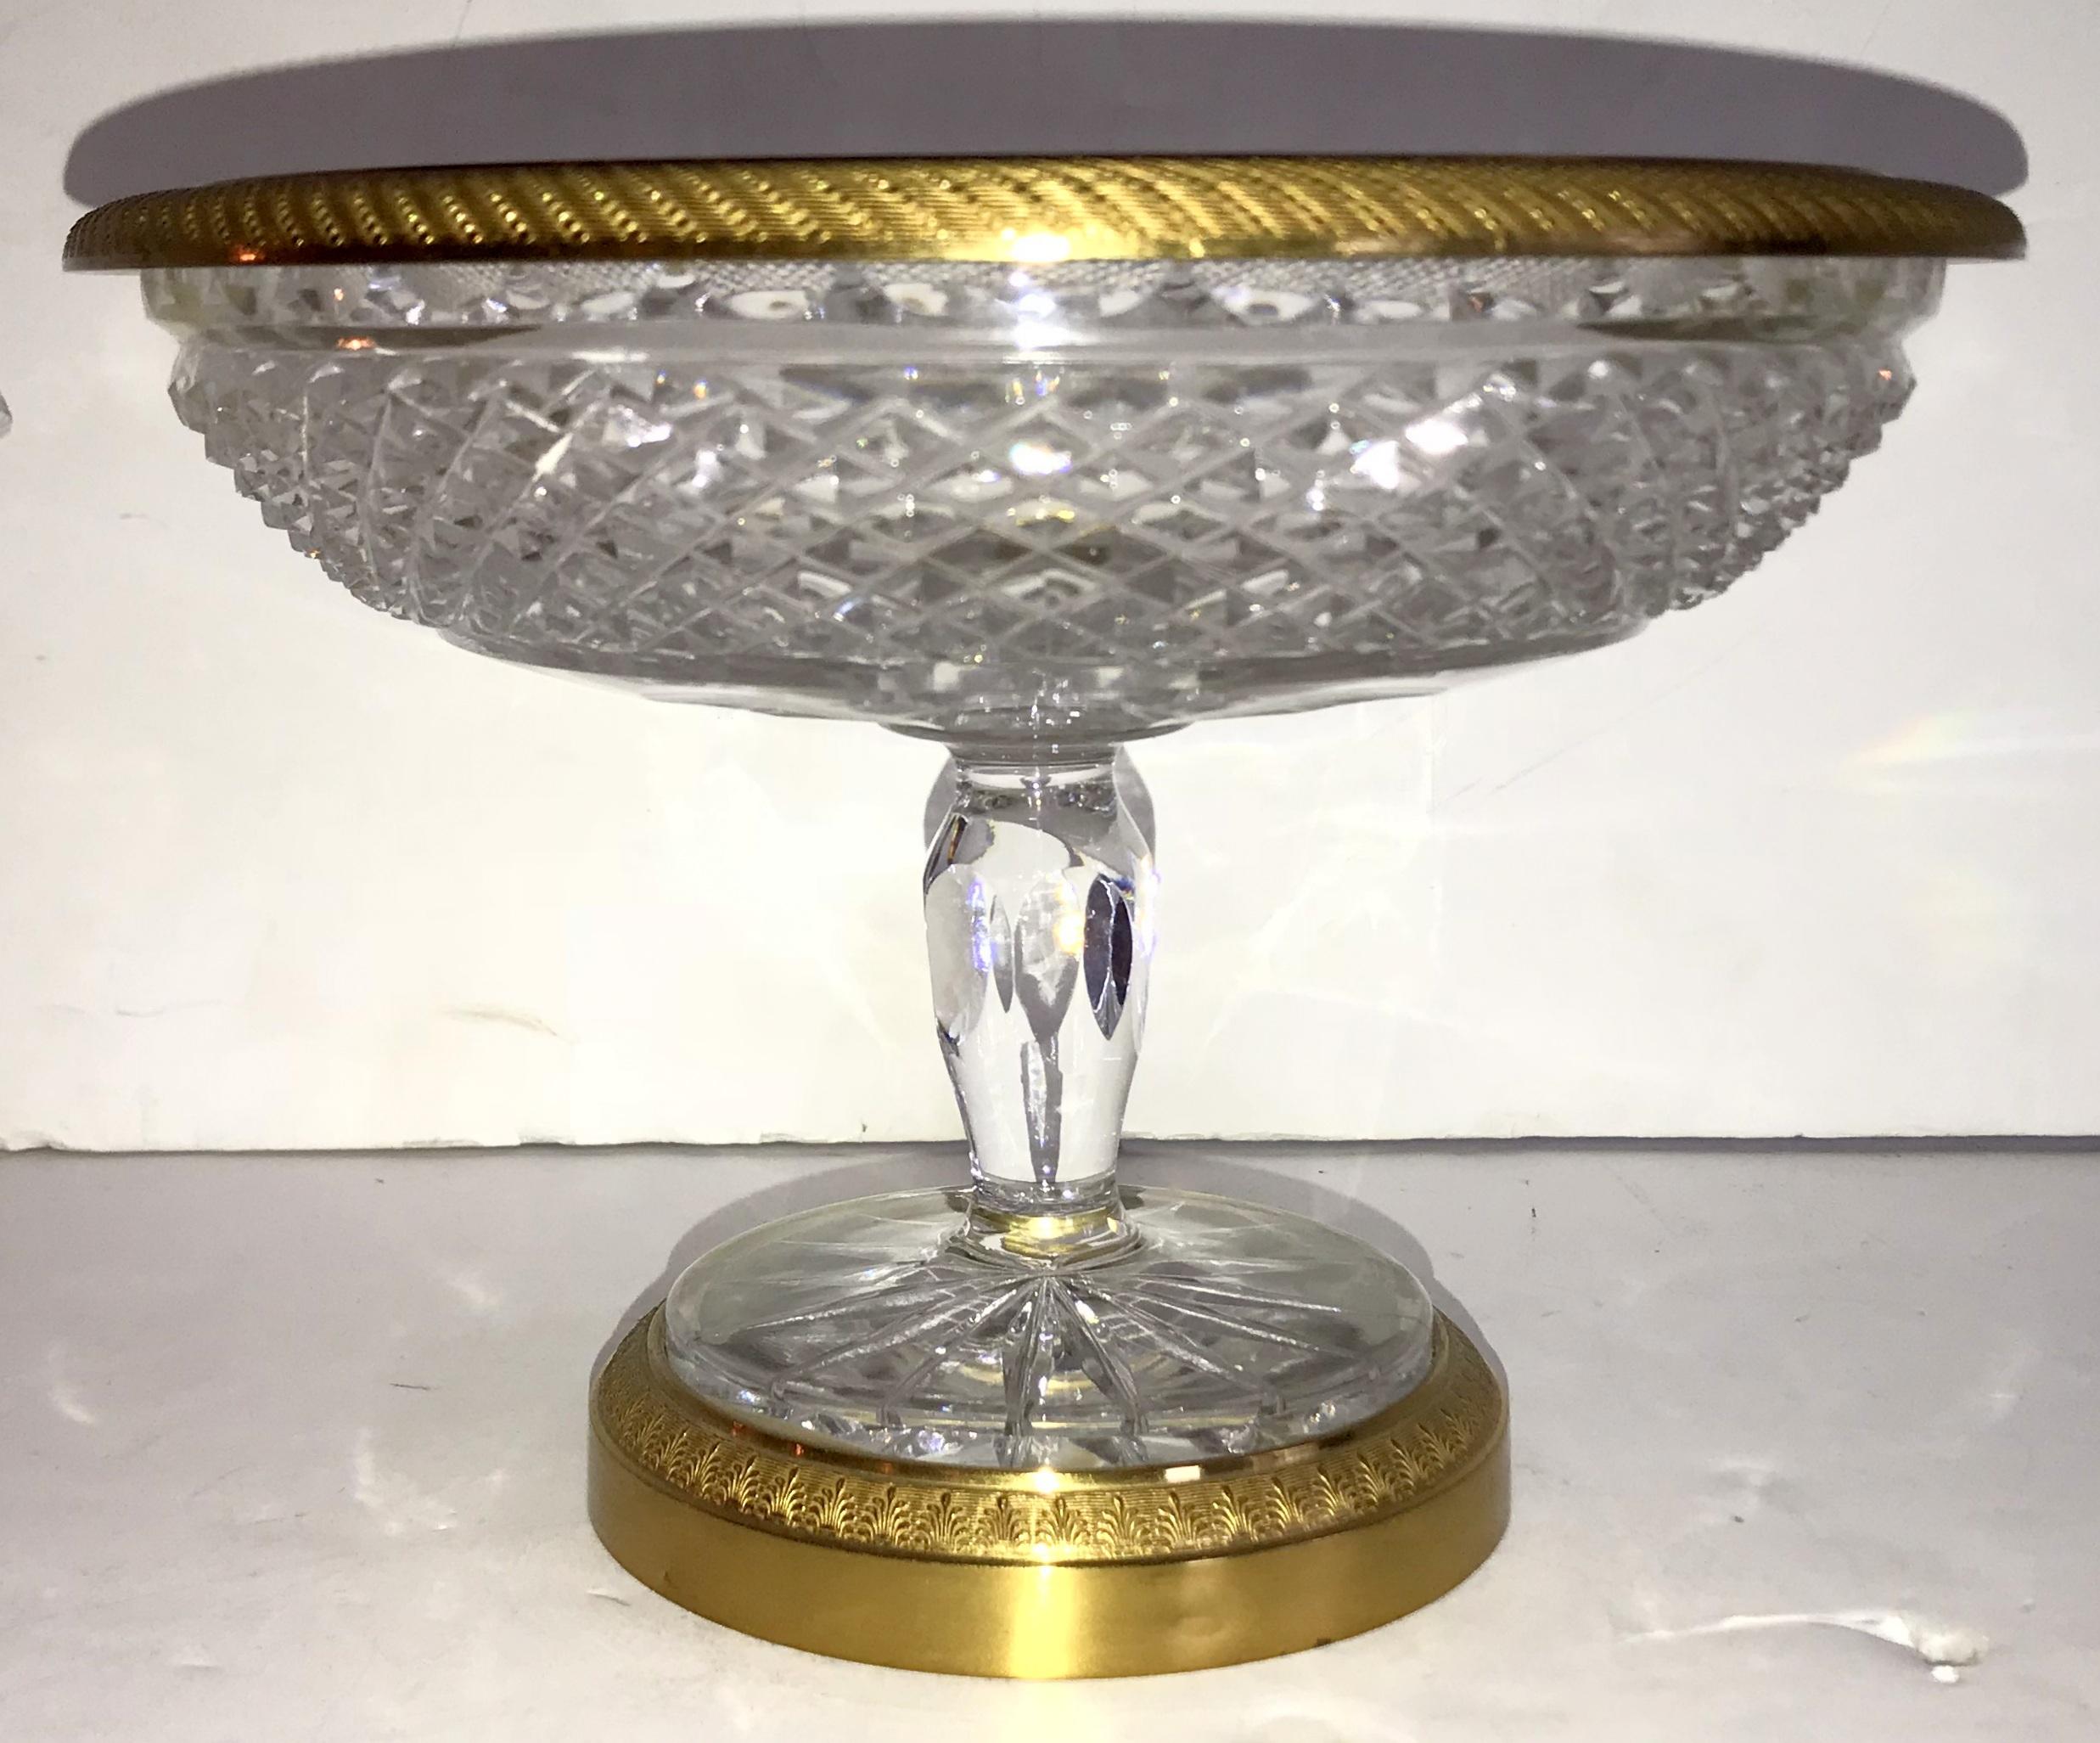 A wonderful French doré bronze and cut crystal ormolu-mounted pedestal bowl in the manner of Baccarat.